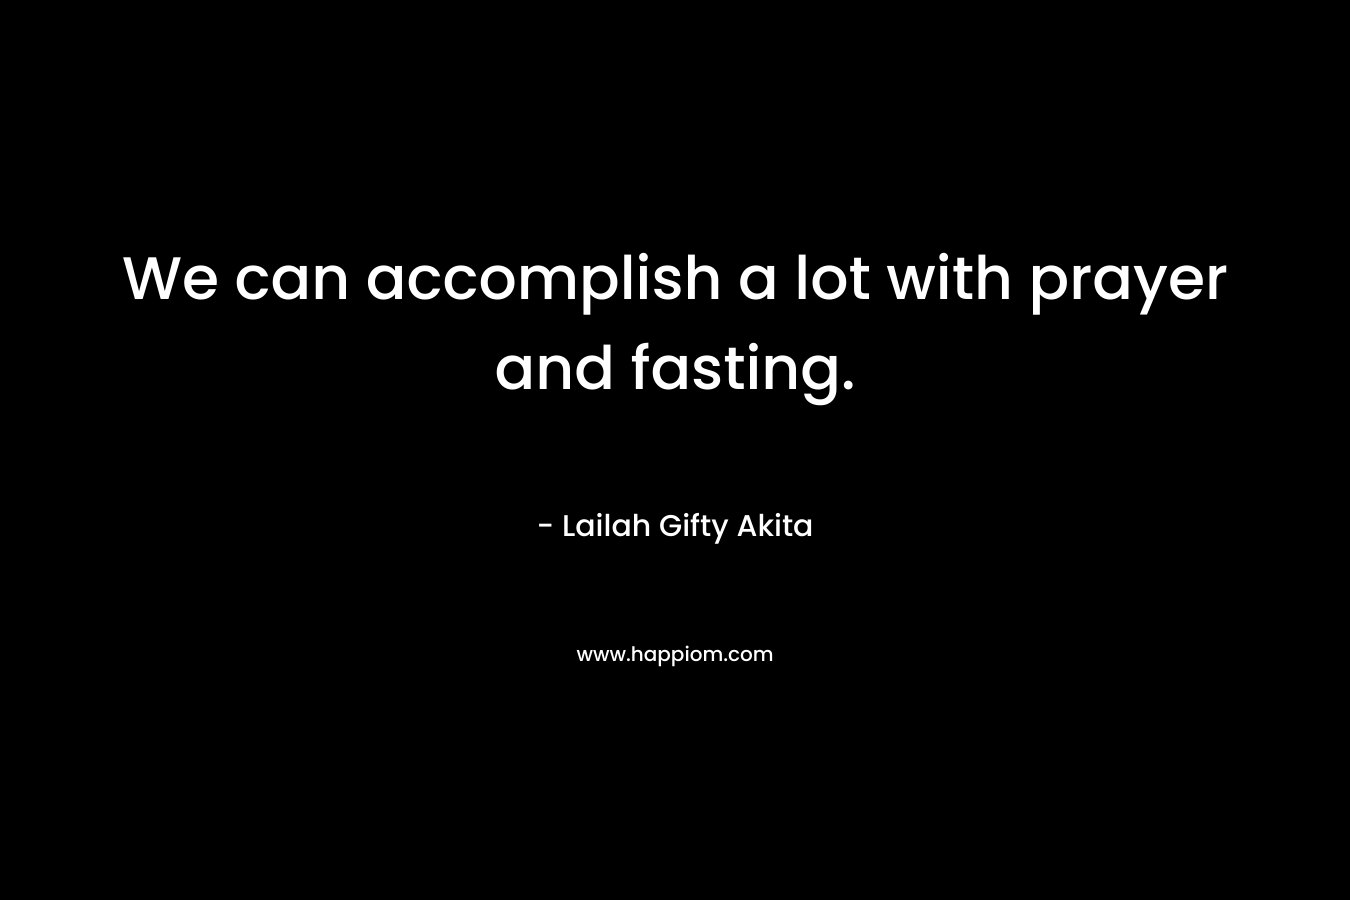 We can accomplish a lot with prayer and fasting.